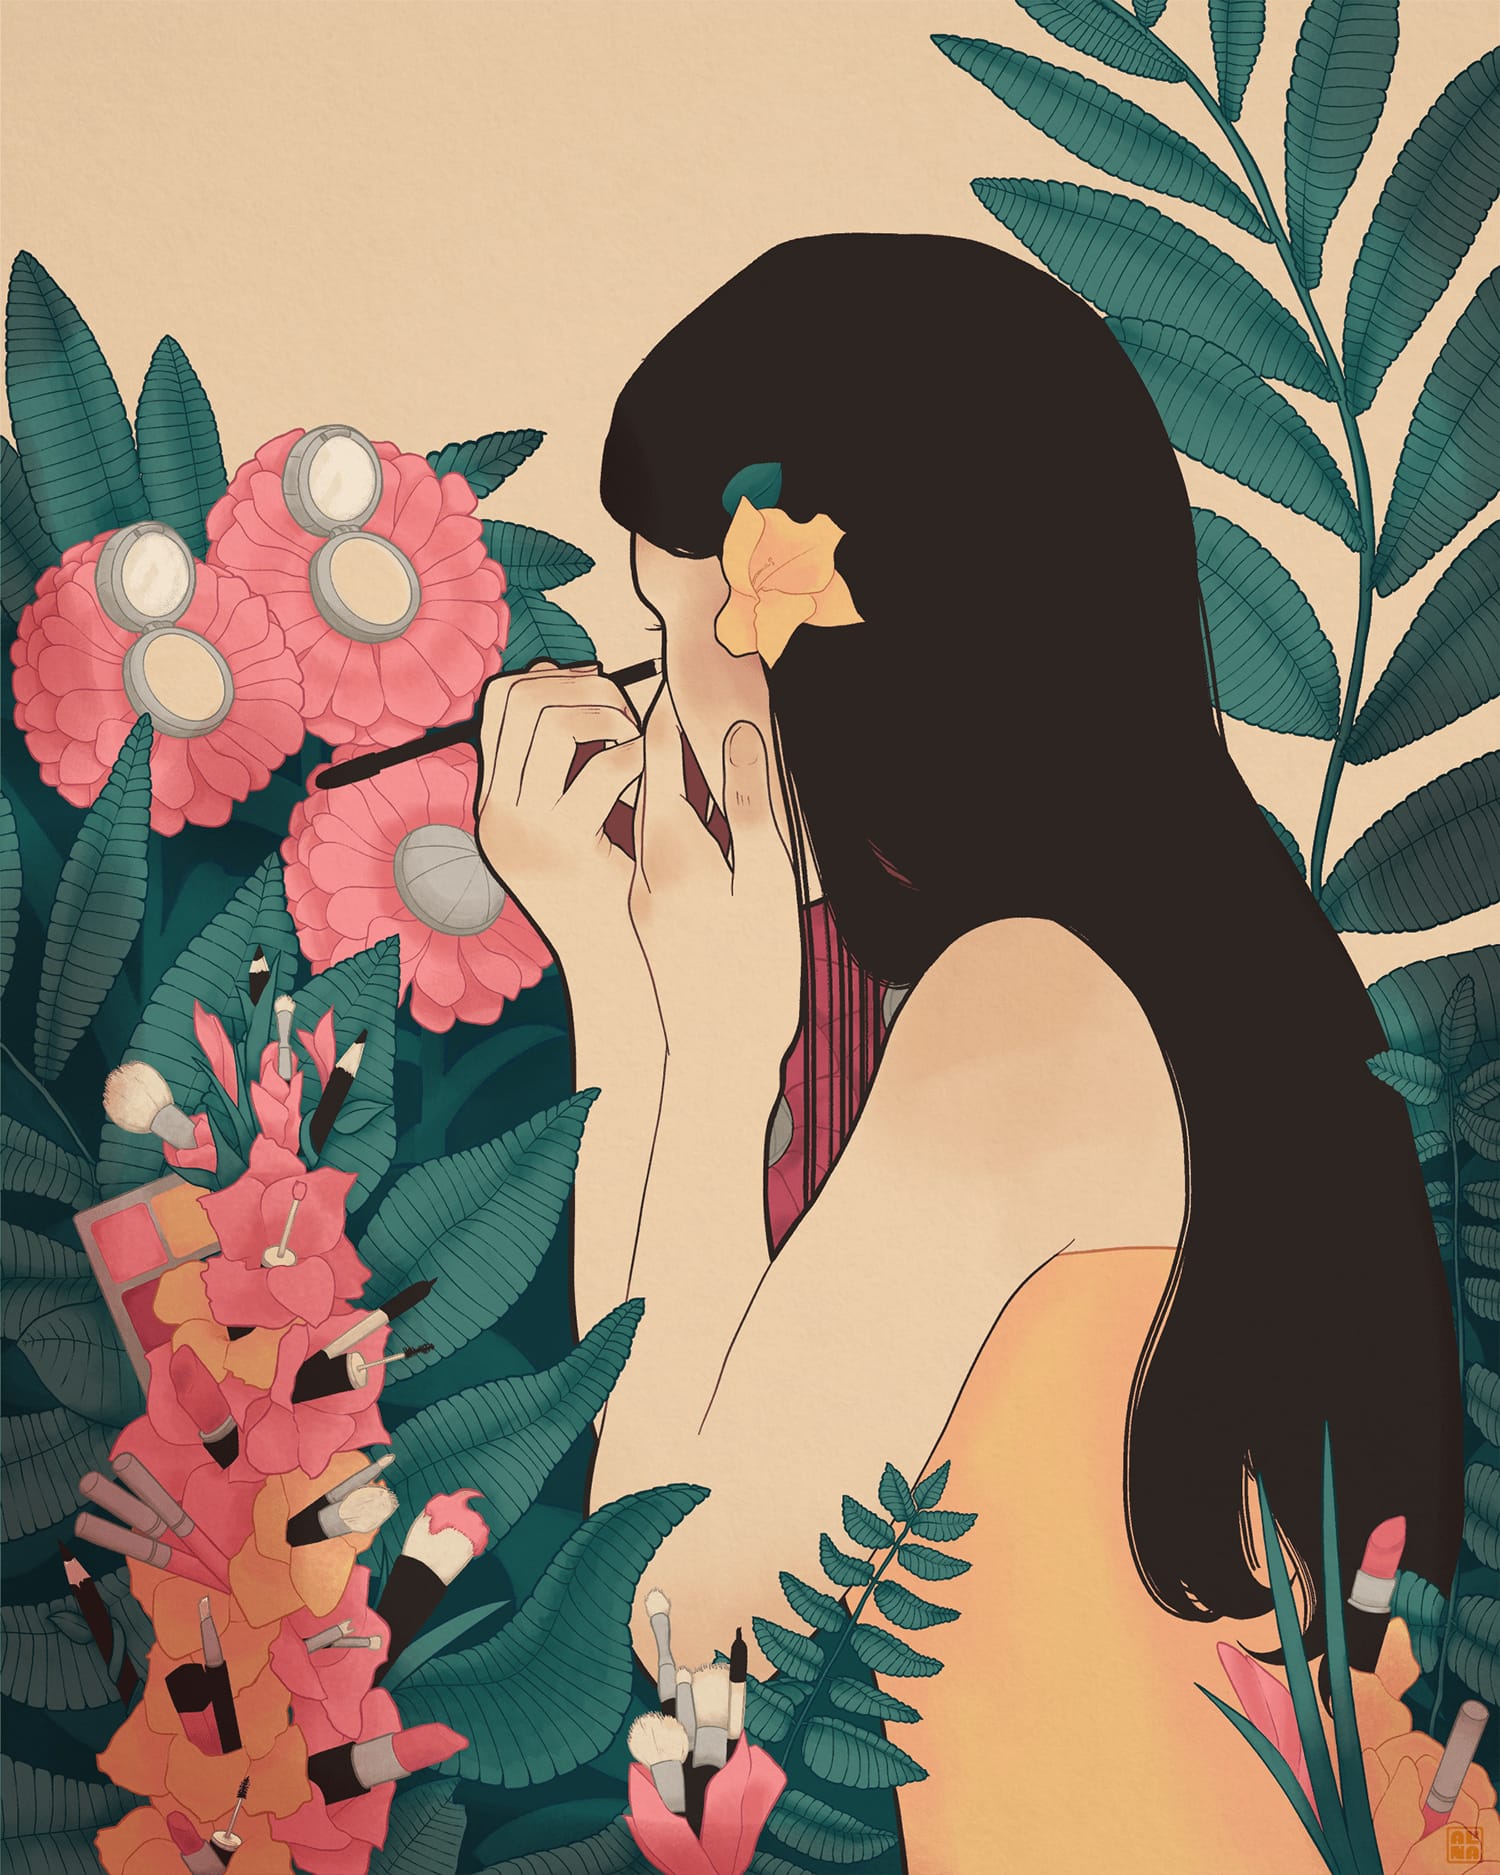 A social media illustration for a fictional cosmetic line of Sephora that depicts a woman, turned away from the viewer doing her makeup, using the cosmetics that are growing out of the flowers and plays around her. Depicted in an art nouveau style.